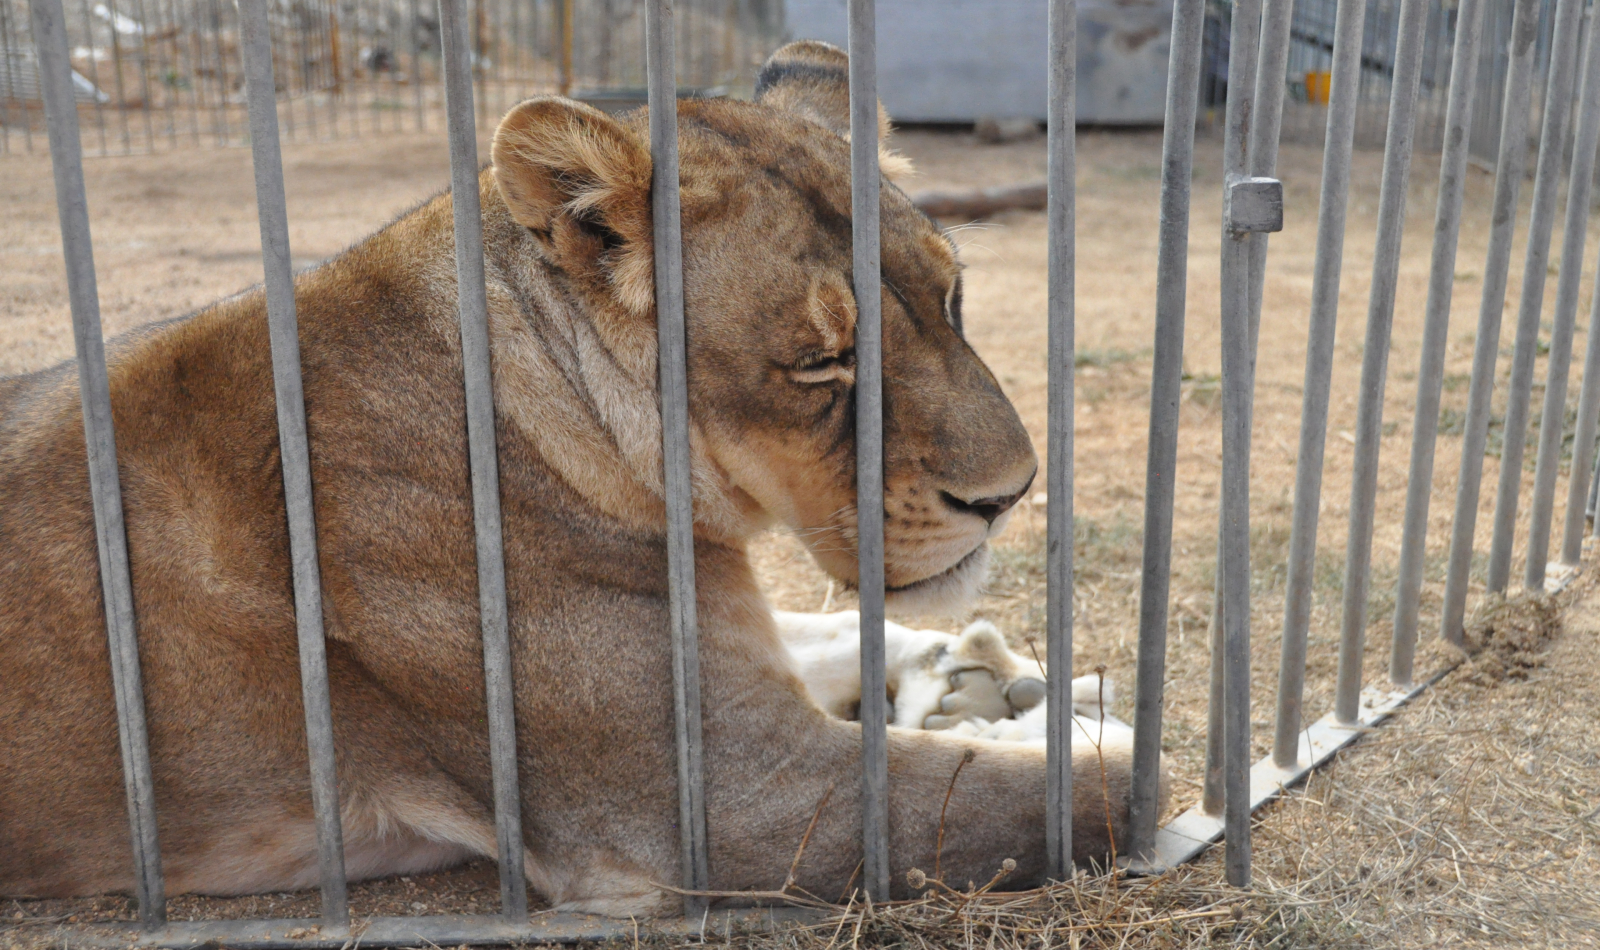 THE SHOCKING TREATMENT OF WILD ANIMALS IN THE CIRCUS